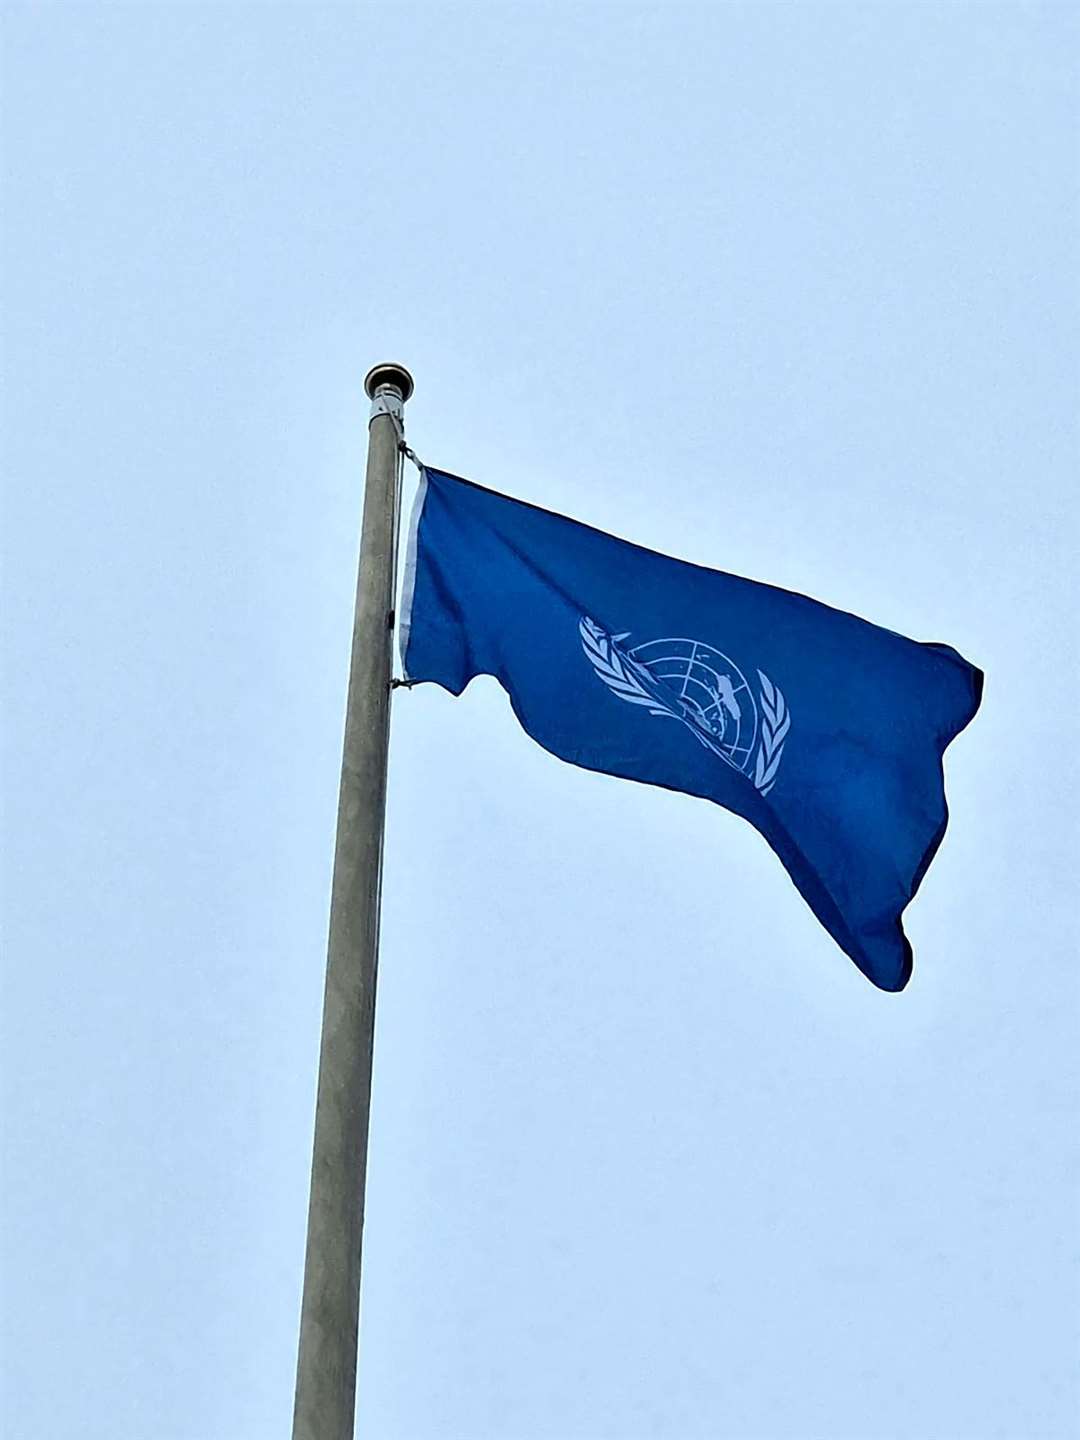 The United Nations flag was raised